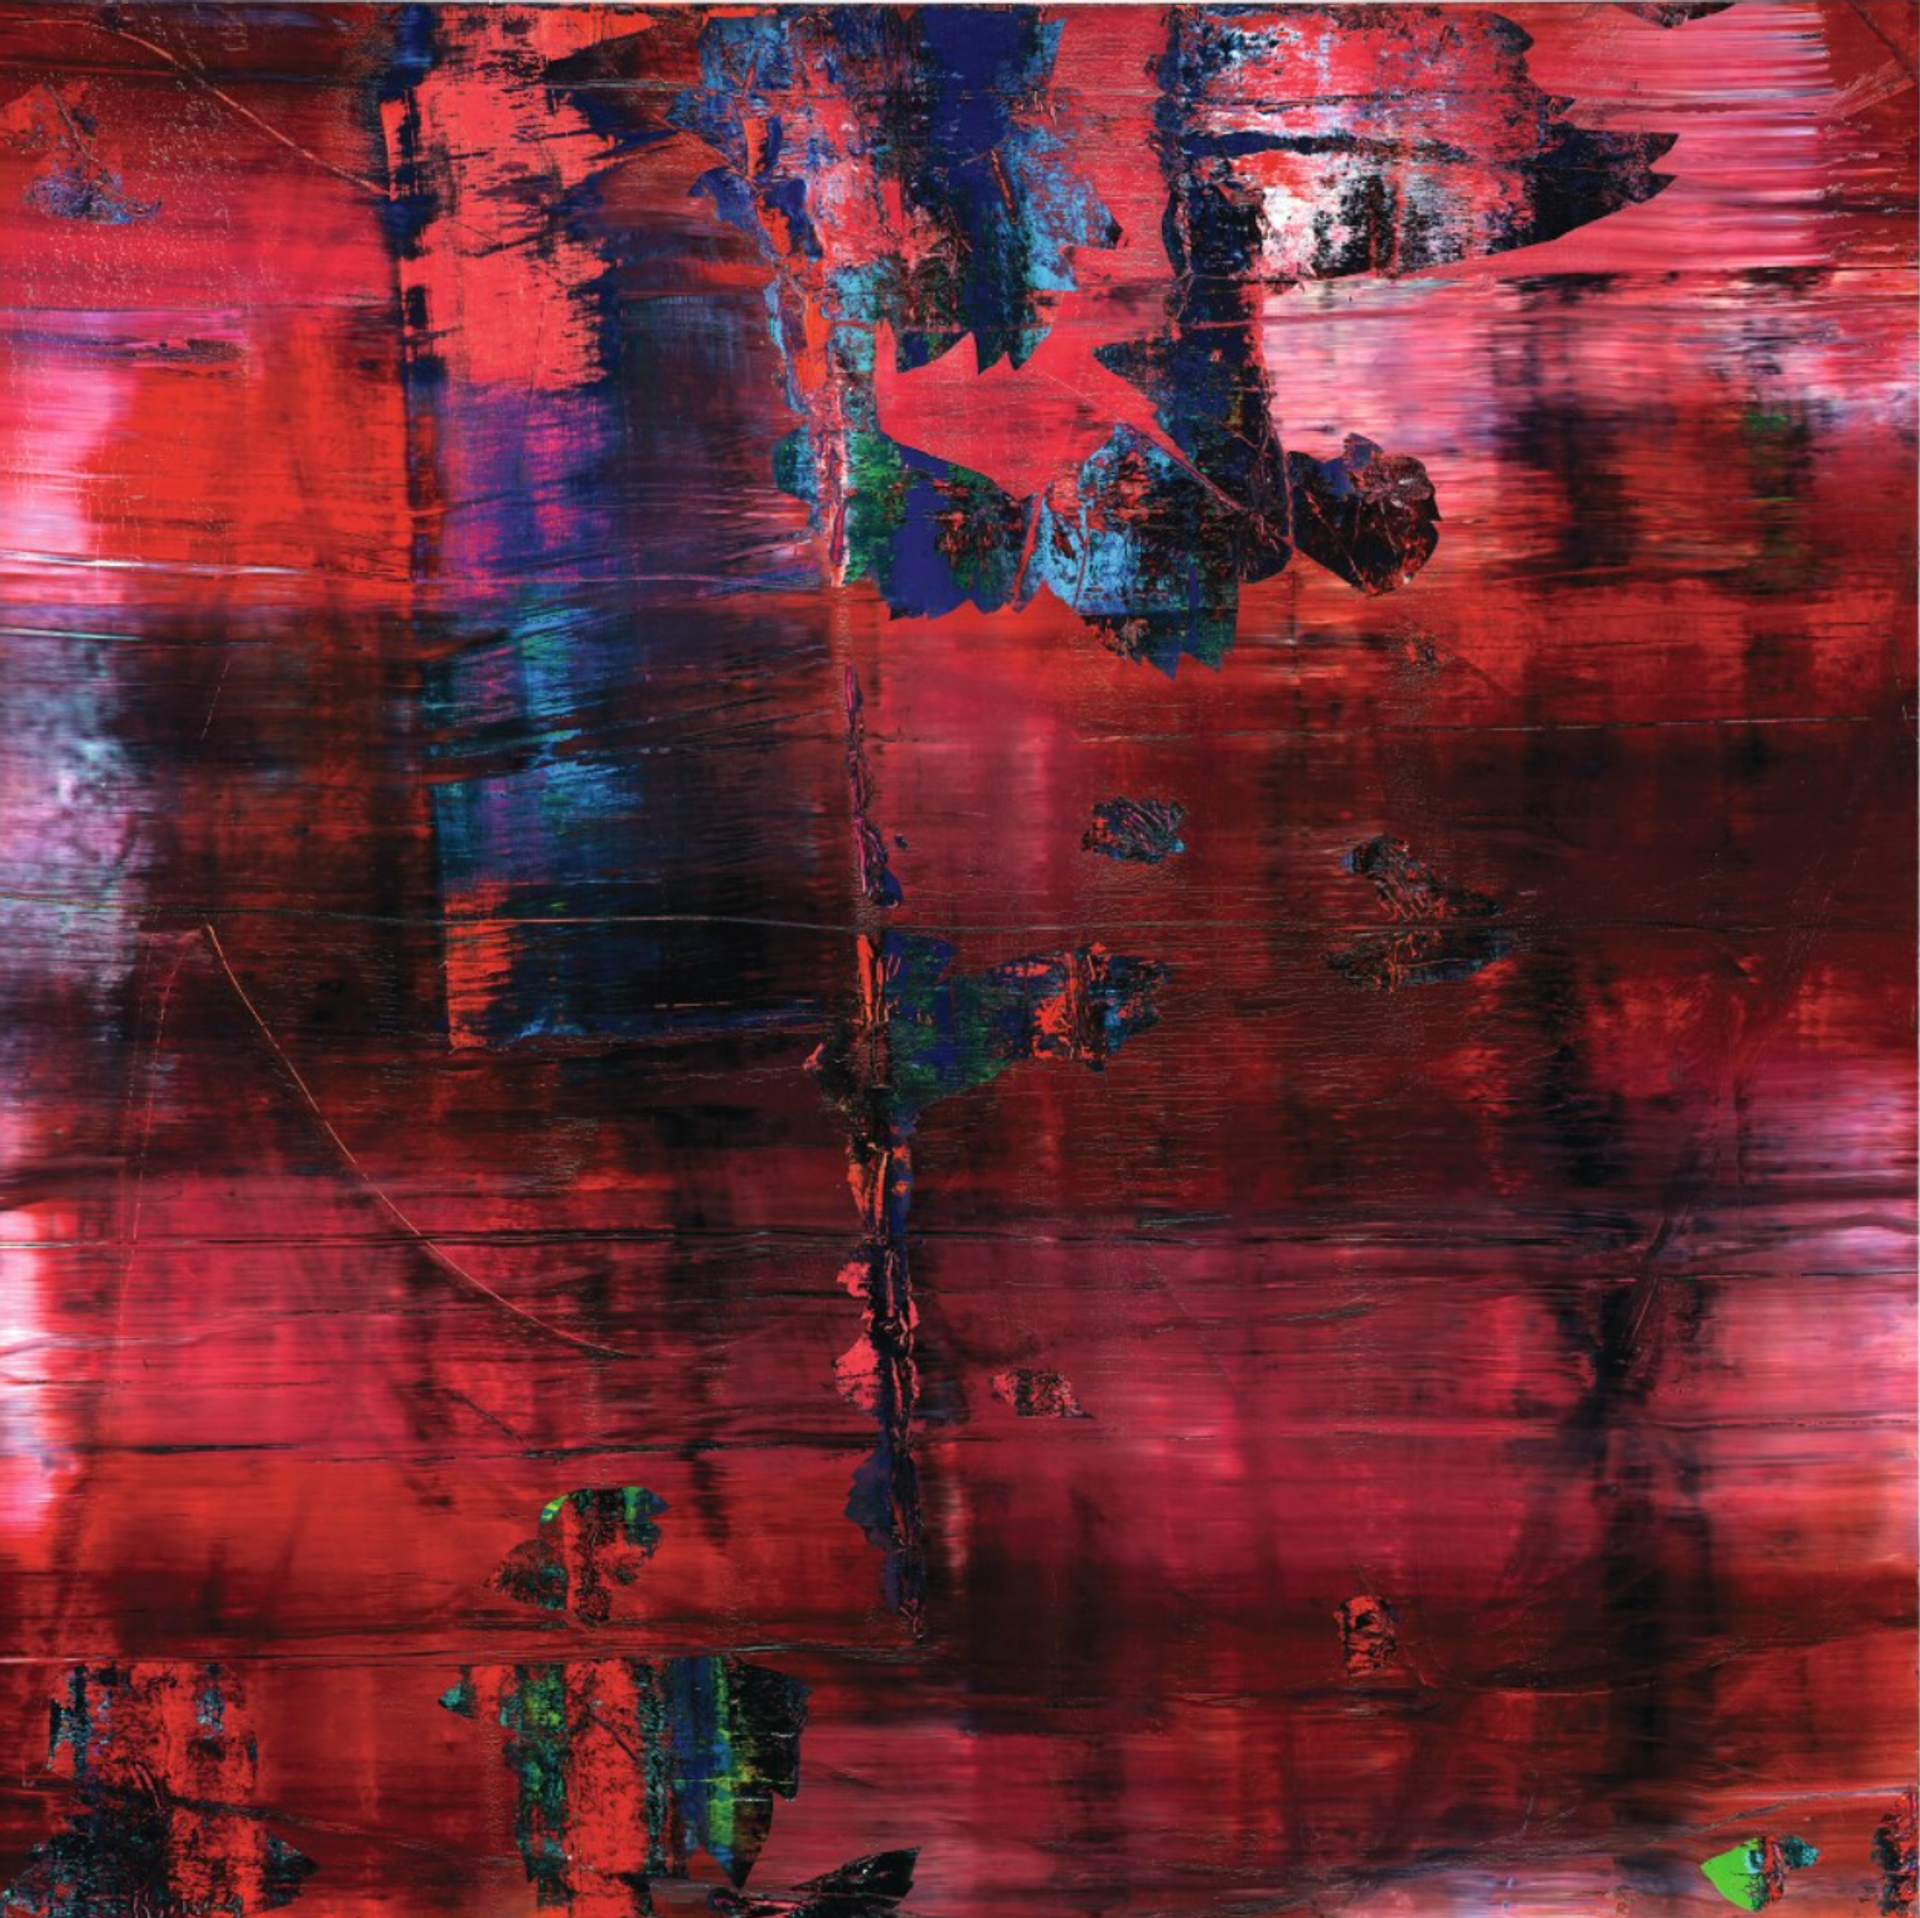 Large-scale abstract painting by Gerhard Richter, with crimson and purple horizontal streaks dominating the work. Poking through from underneath the reddish tones are blues and greens.